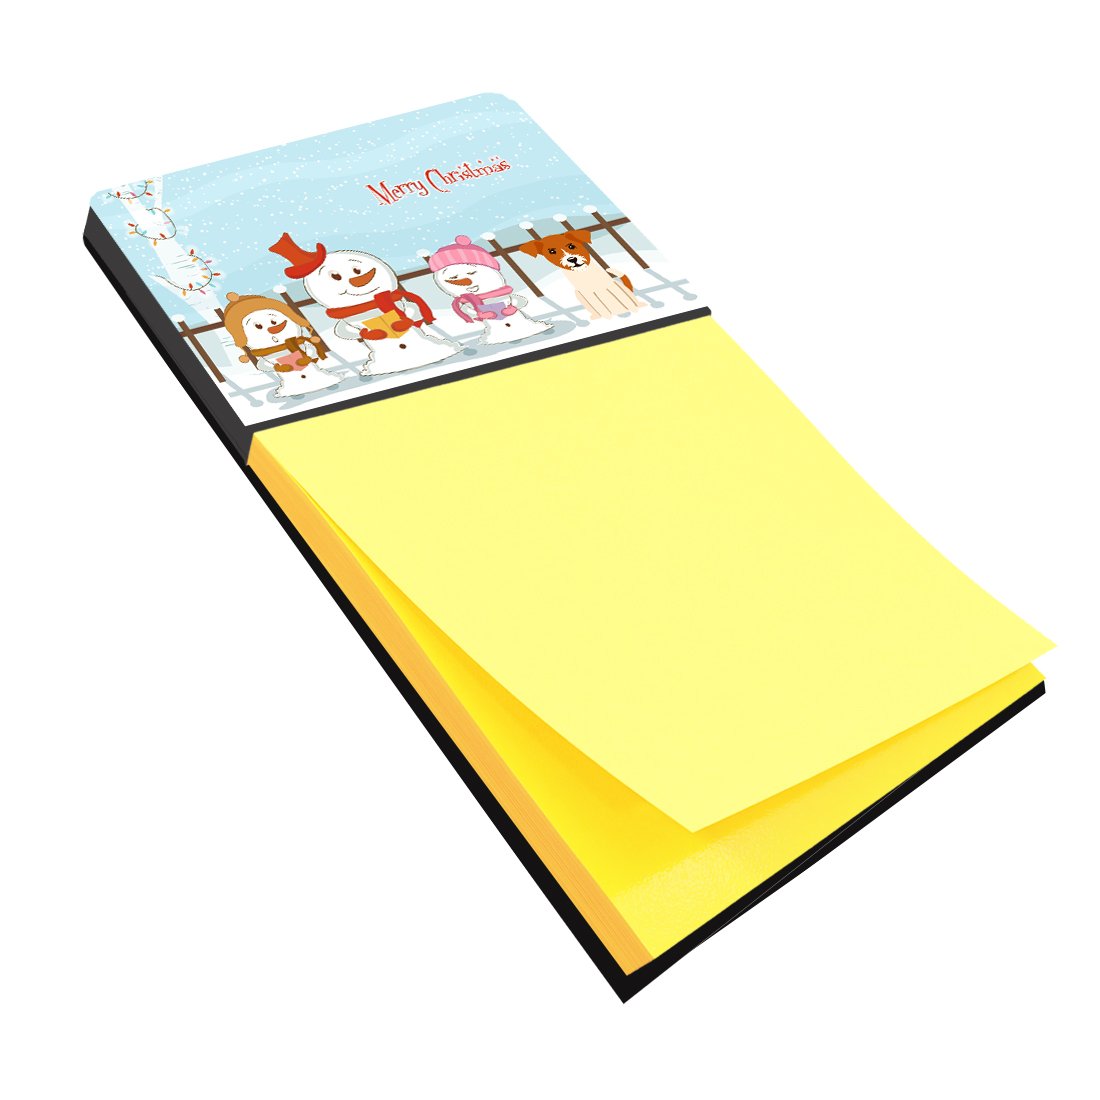 Merry Christmas Carolers Jack Russell Terrier Sticky Note Holder BB2439SN by Caroline's Treasures